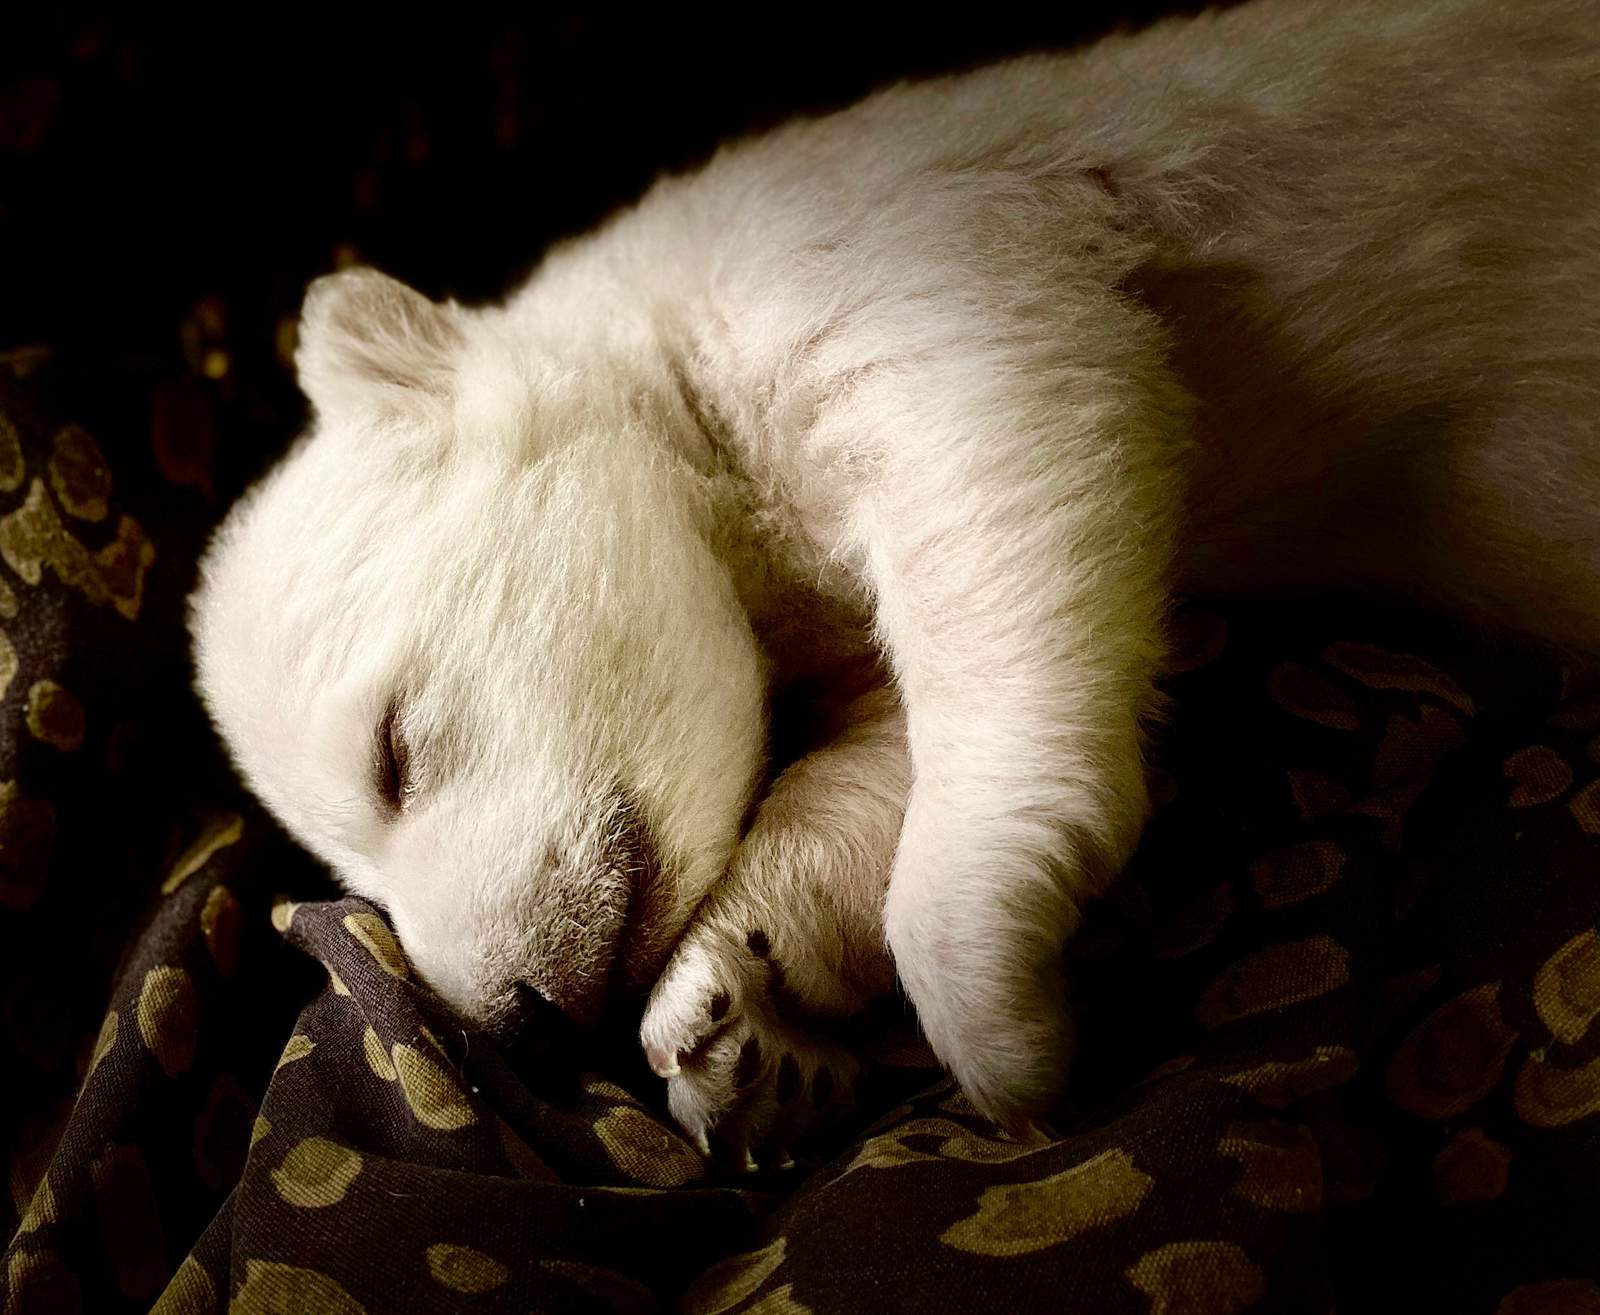 Nightside Report Jan. 28, 2021: 2 polar bear cubs born, raised at Detroit Zoo for first time in years, Mott Hospital doctors weigh in on safety of returning to in-person learning